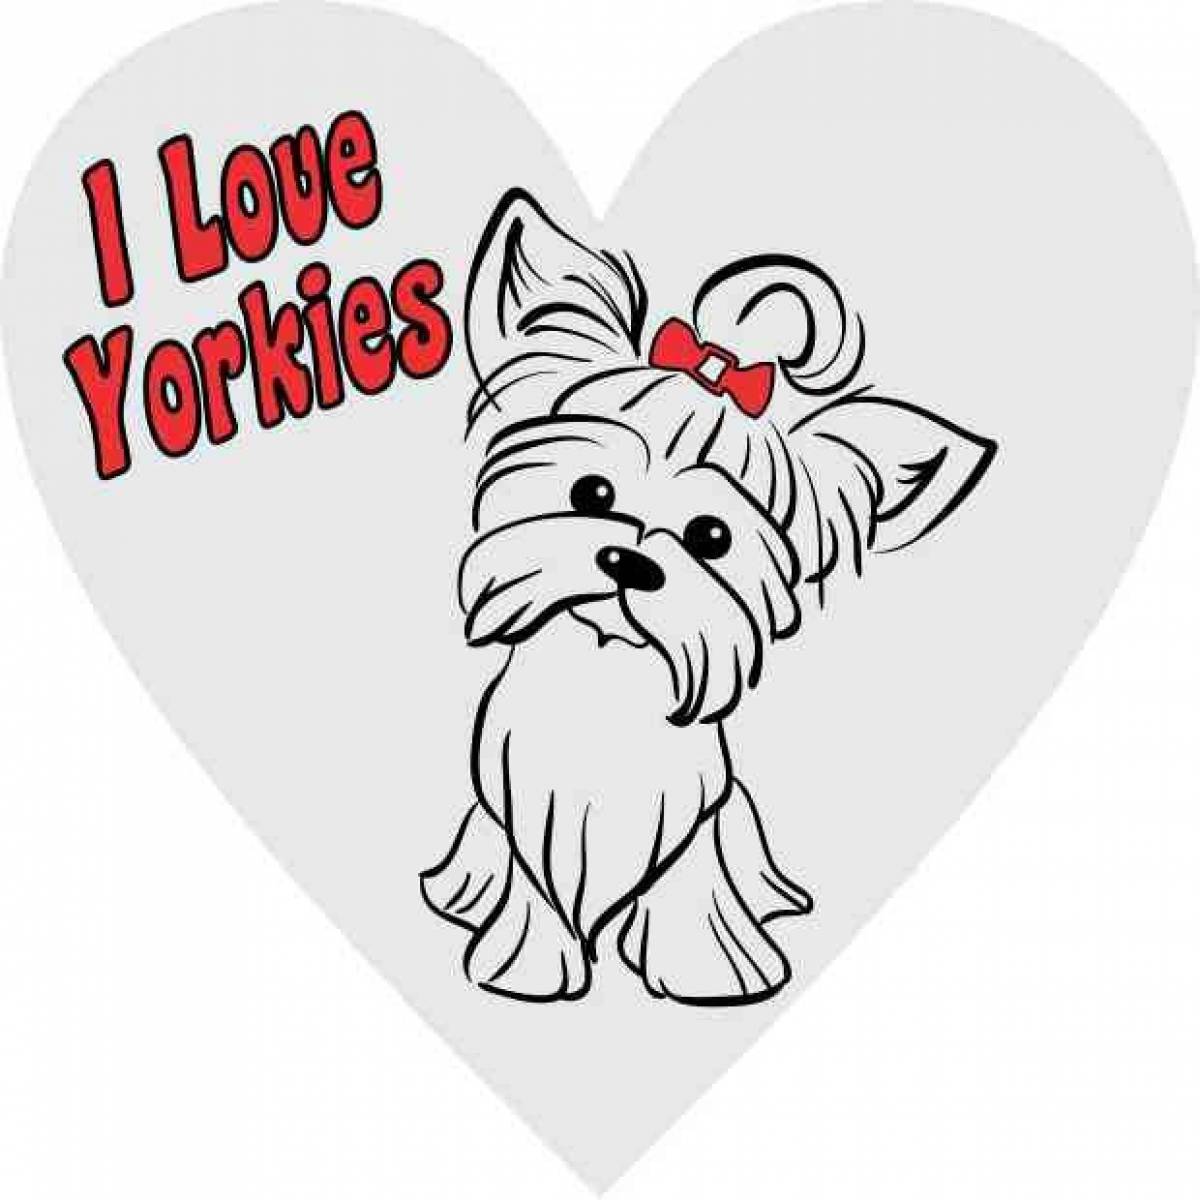 Cute yorkshire terrier coloring page